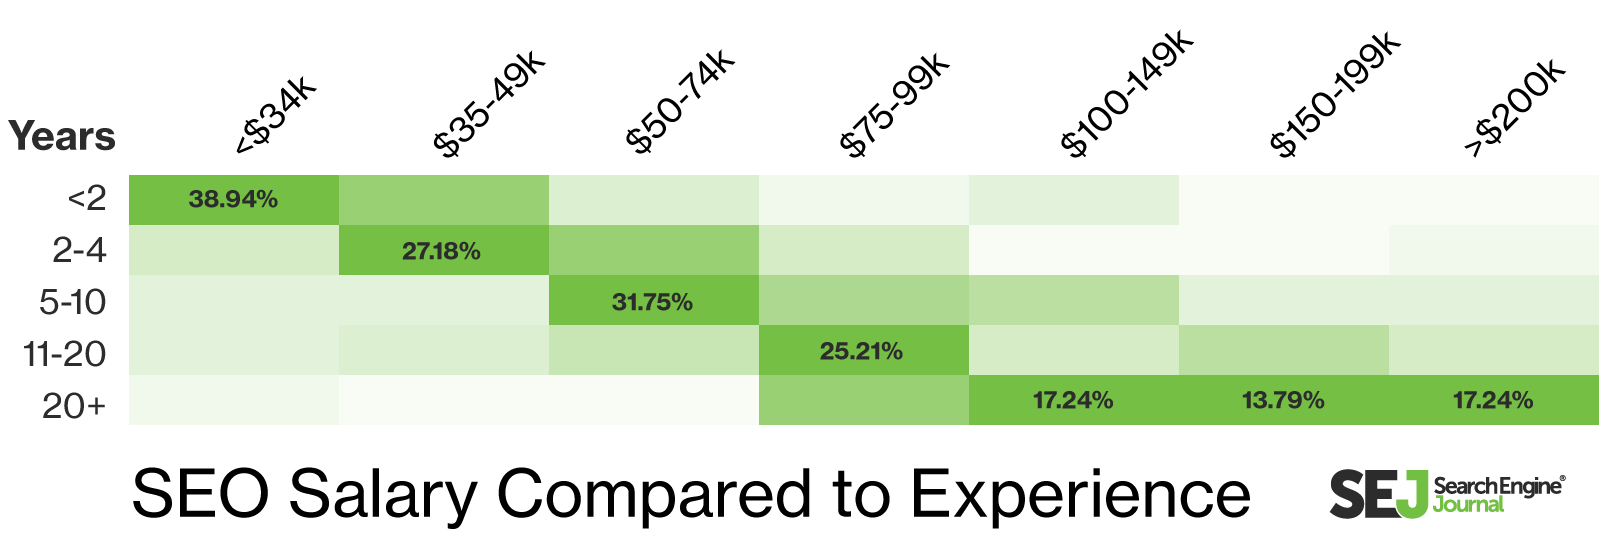 Average SEO salary by years of experience